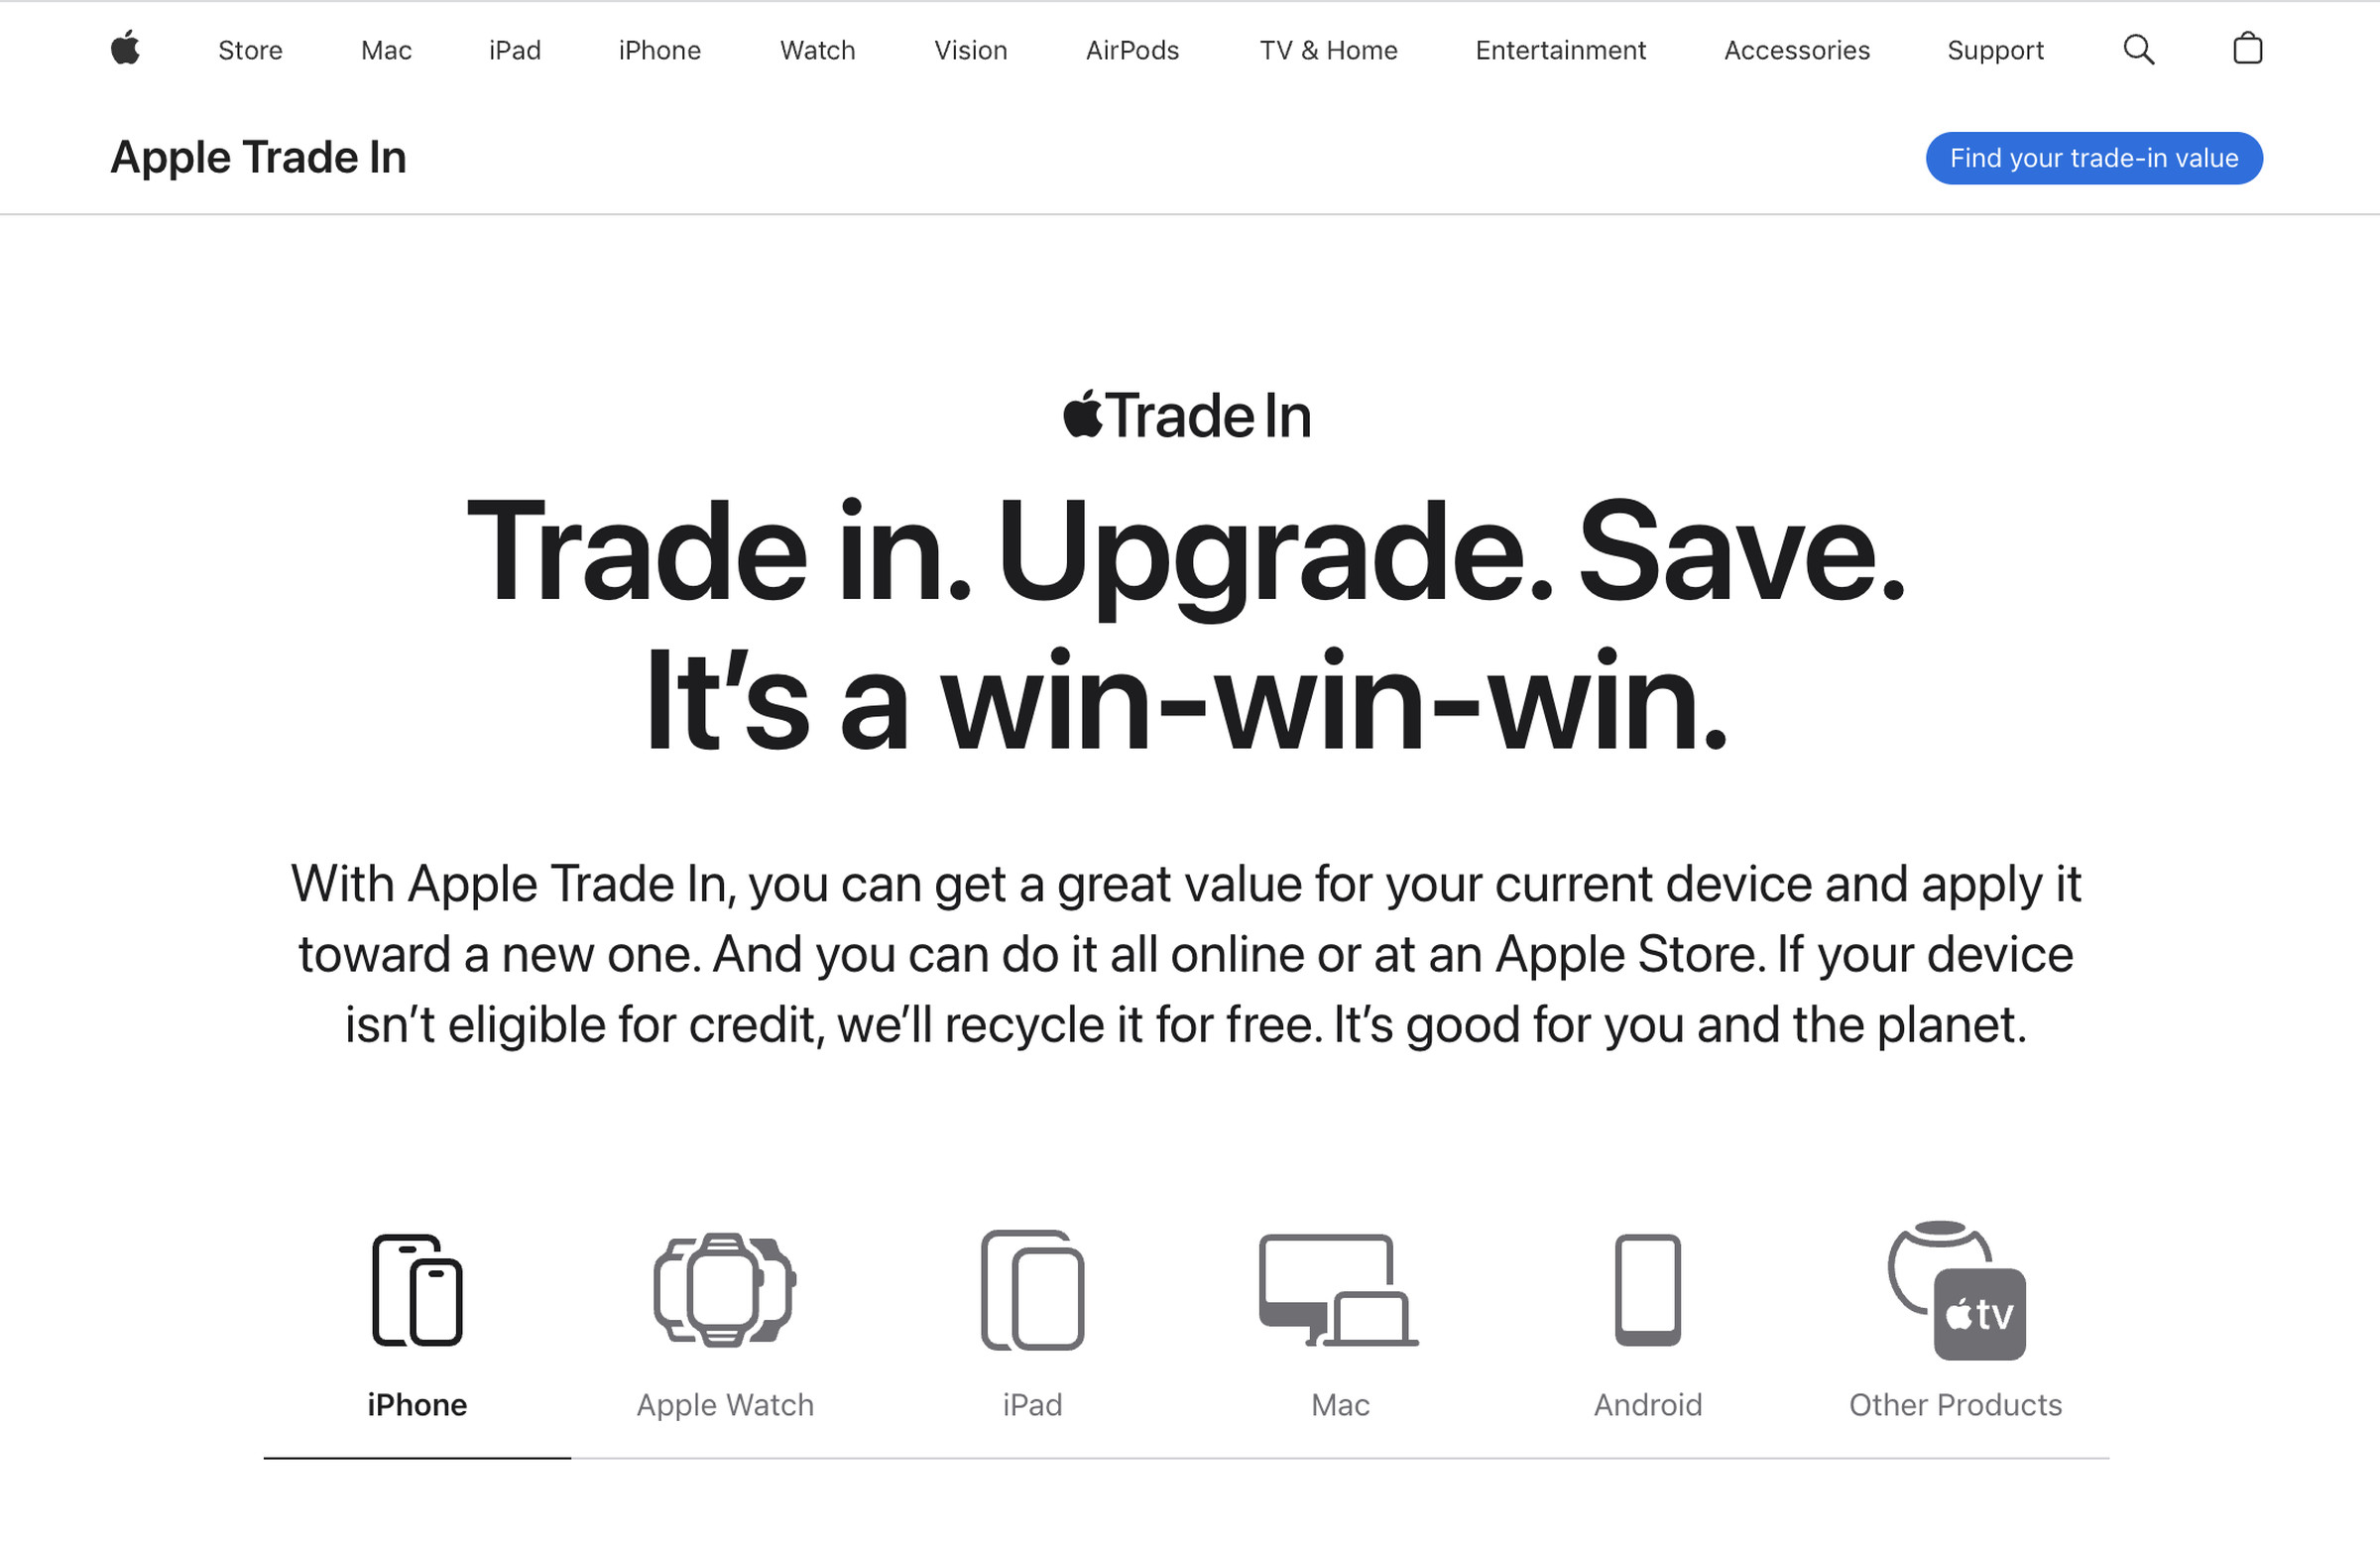 Apple Trade In web page